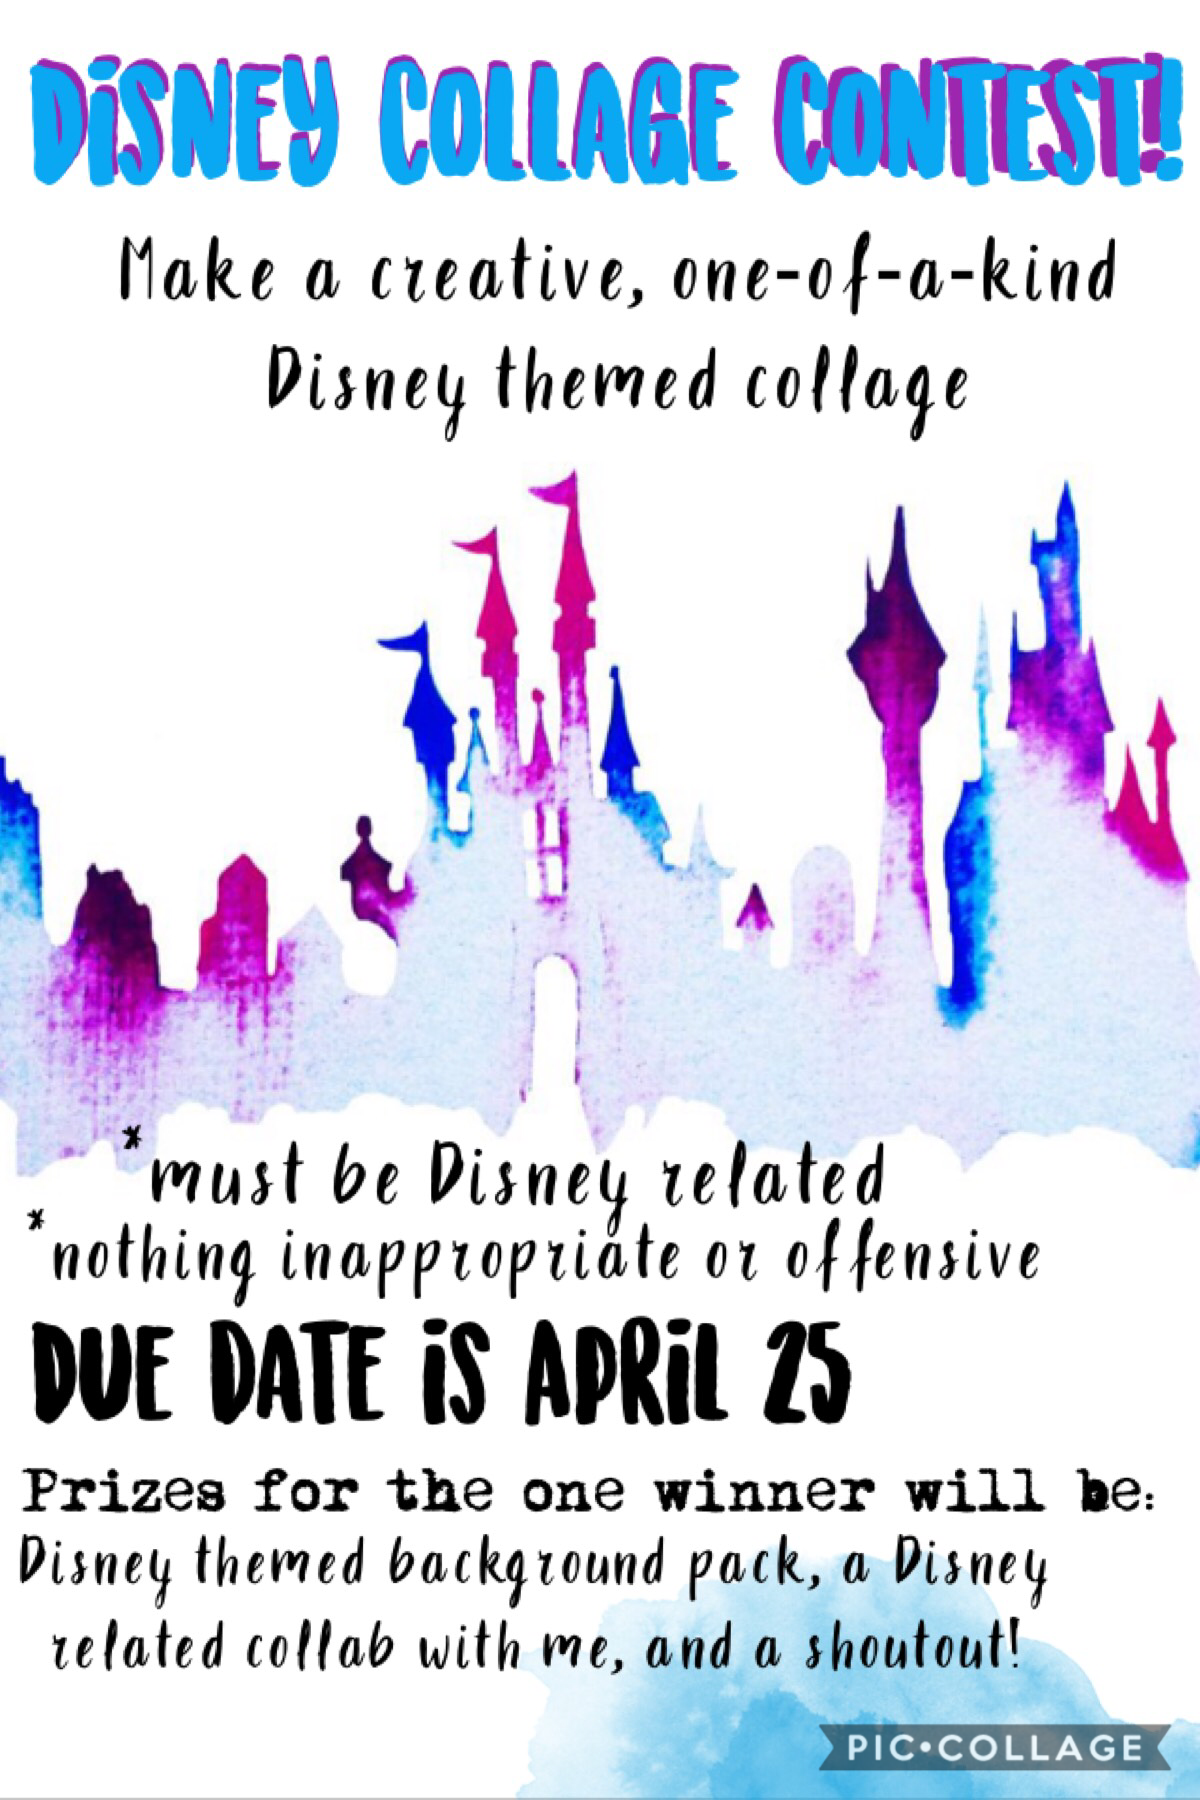 Disney Collage Contest!! Please enter and tell your friends! Wonderfully_made suggested this contest!💕 Have a good weeknd! Due date to enter is April 25! Don’t hesitate to ask any questions!😄